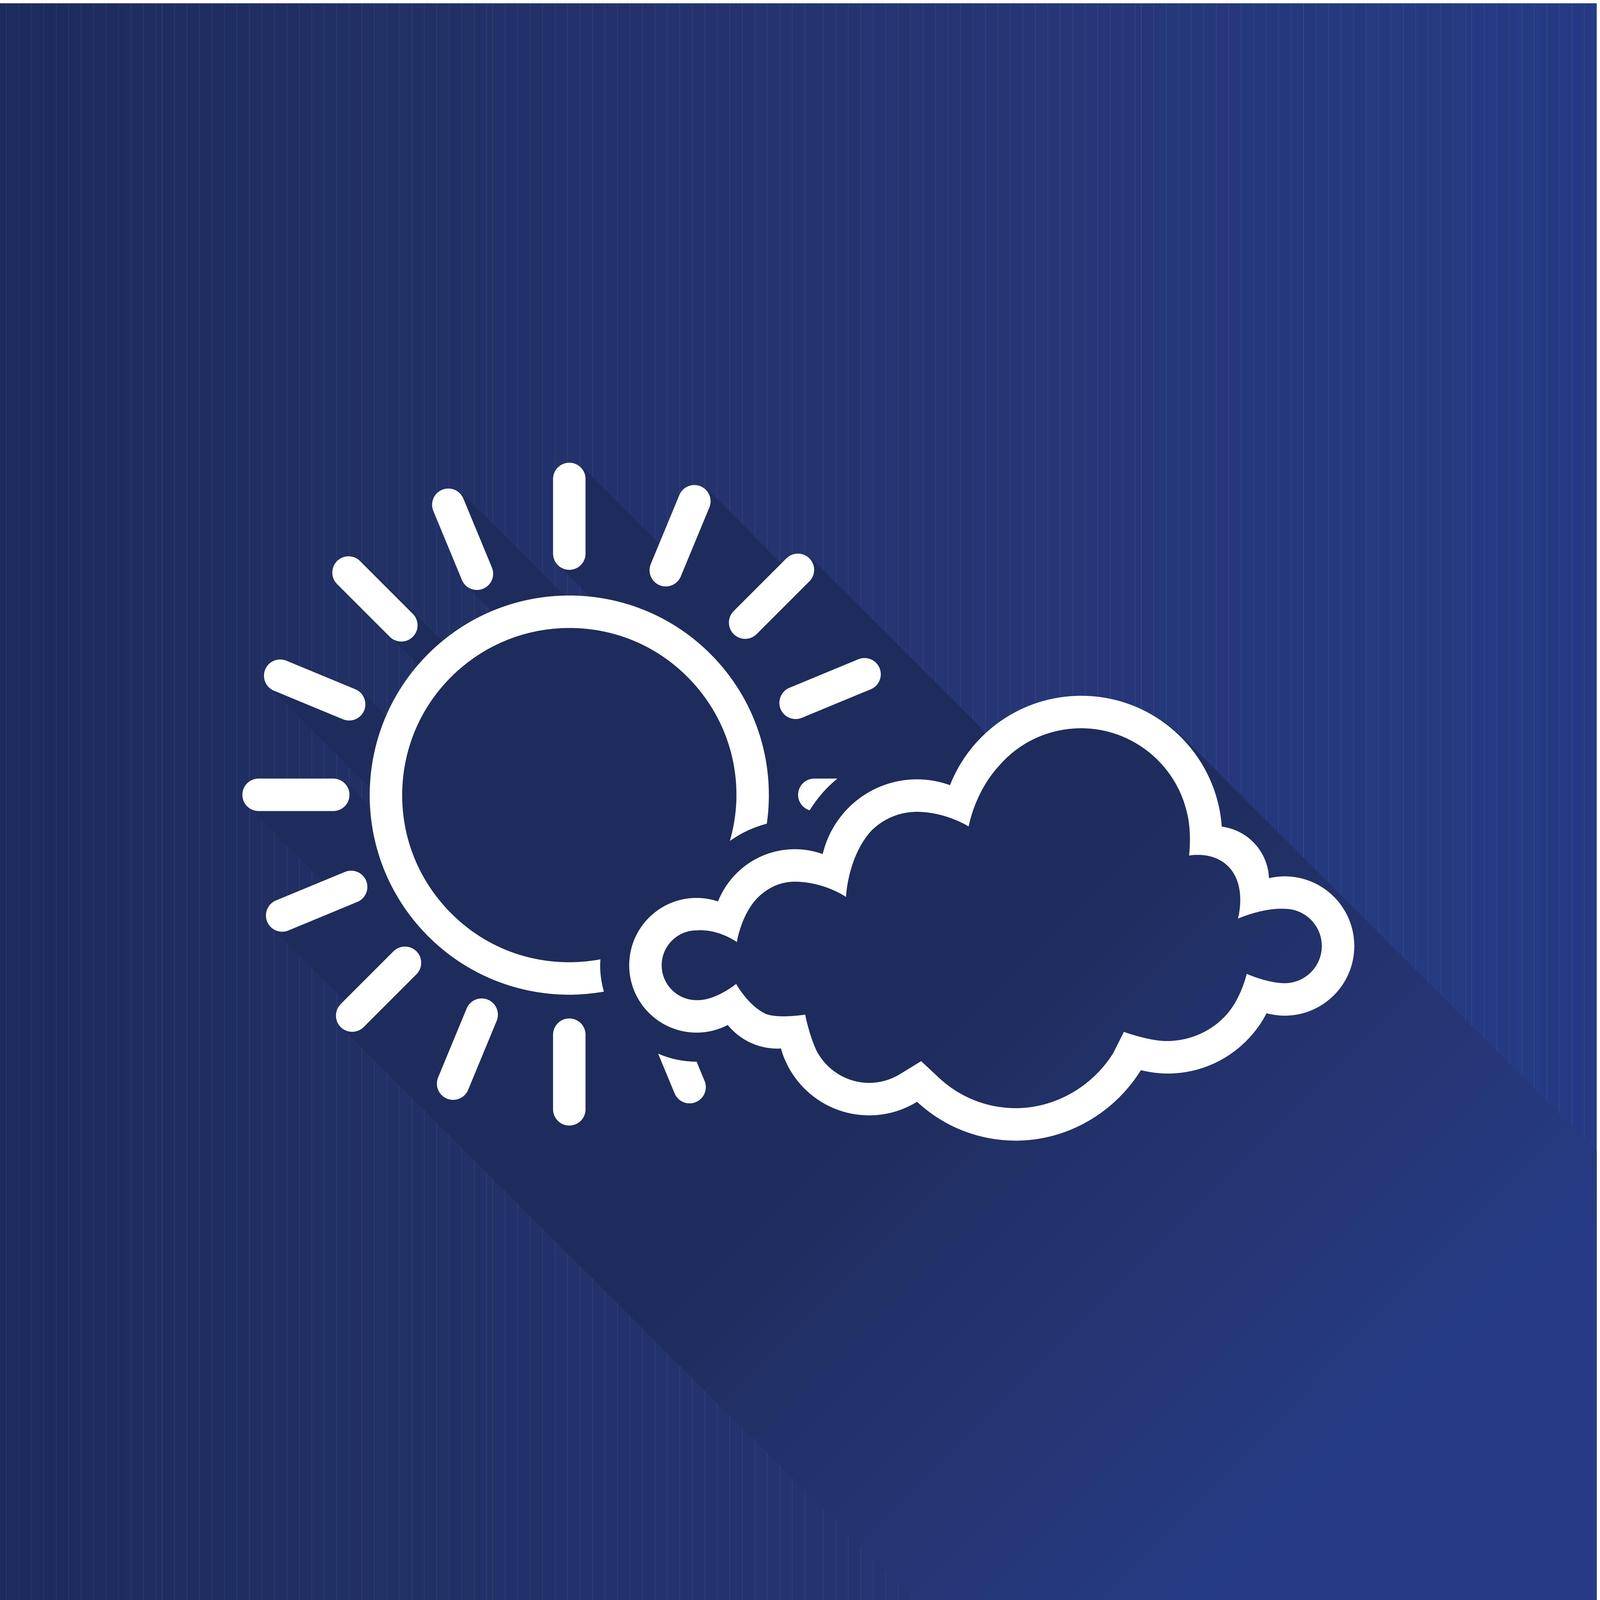 Weather forecast partly sunny icon in Metro user interface color style. Meteorology overcast